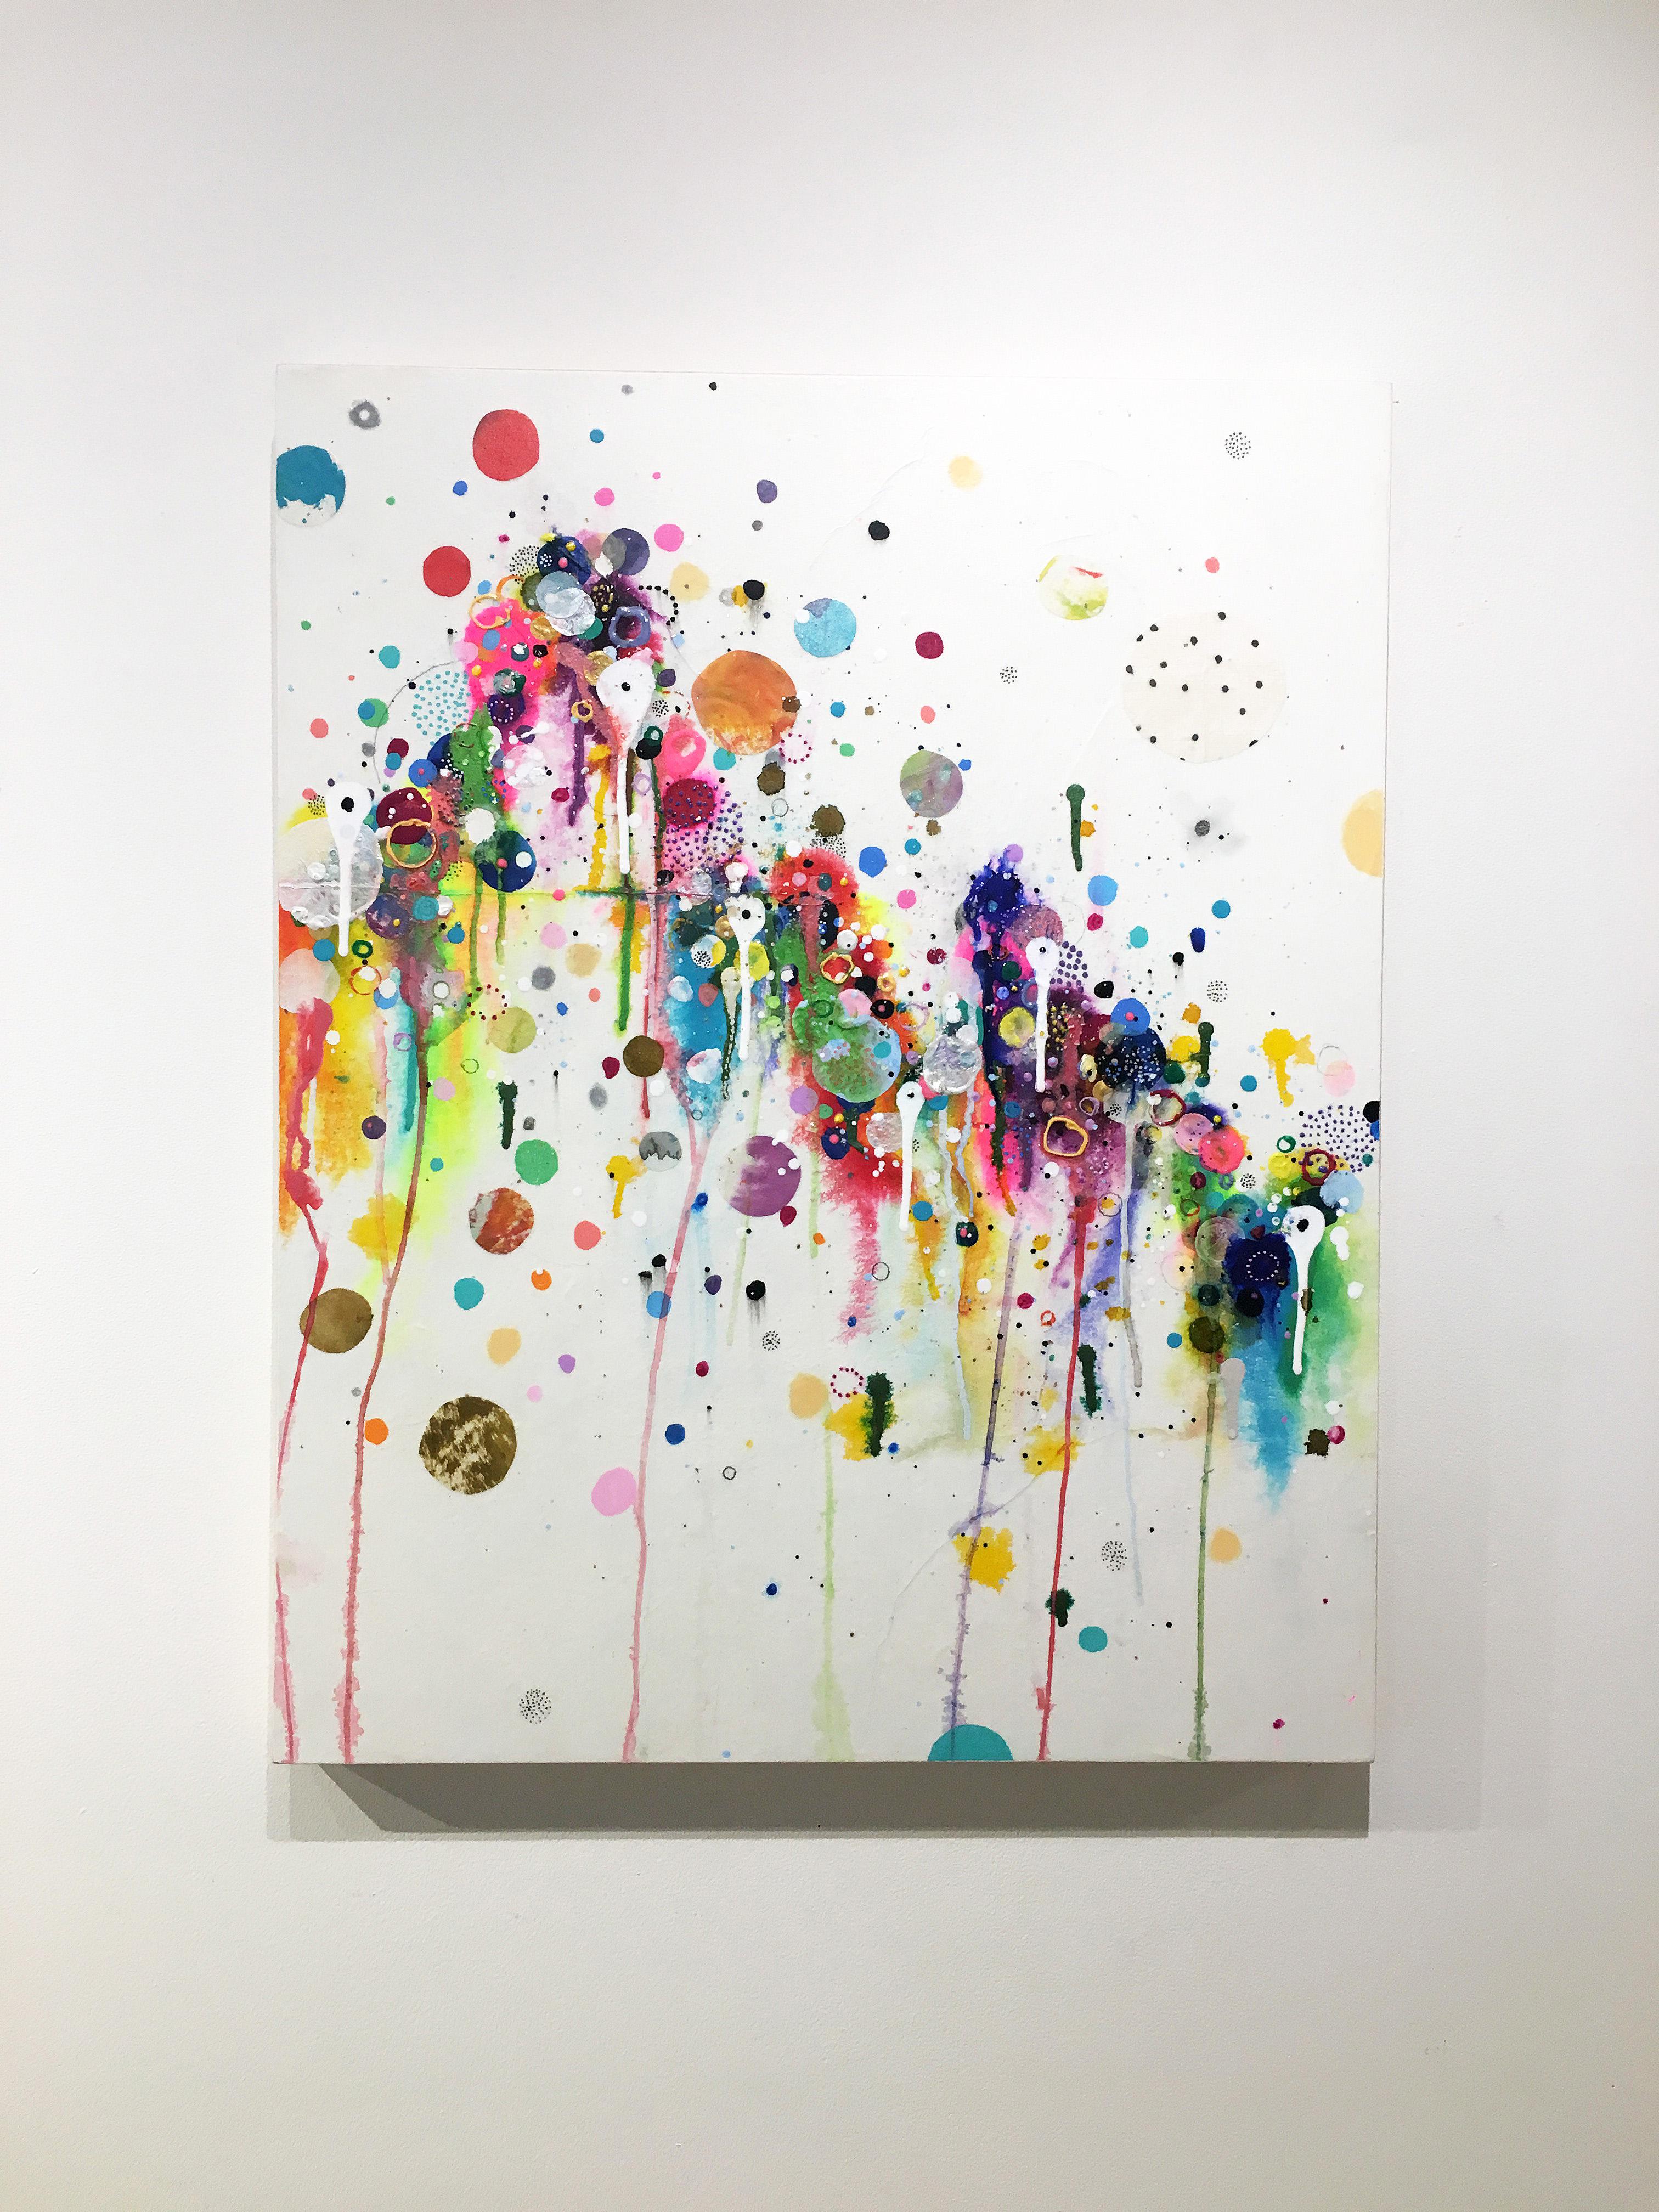 'Hallelujah' 2018 by Seattle based abstract painter, Liz Tran. Mixed media on panel, 30 x 24 in. The featured “Party” paintings are festooned with bold neon colored bubbles, streamers, splatters, and elongated drips. Composed of ink, acrylic,